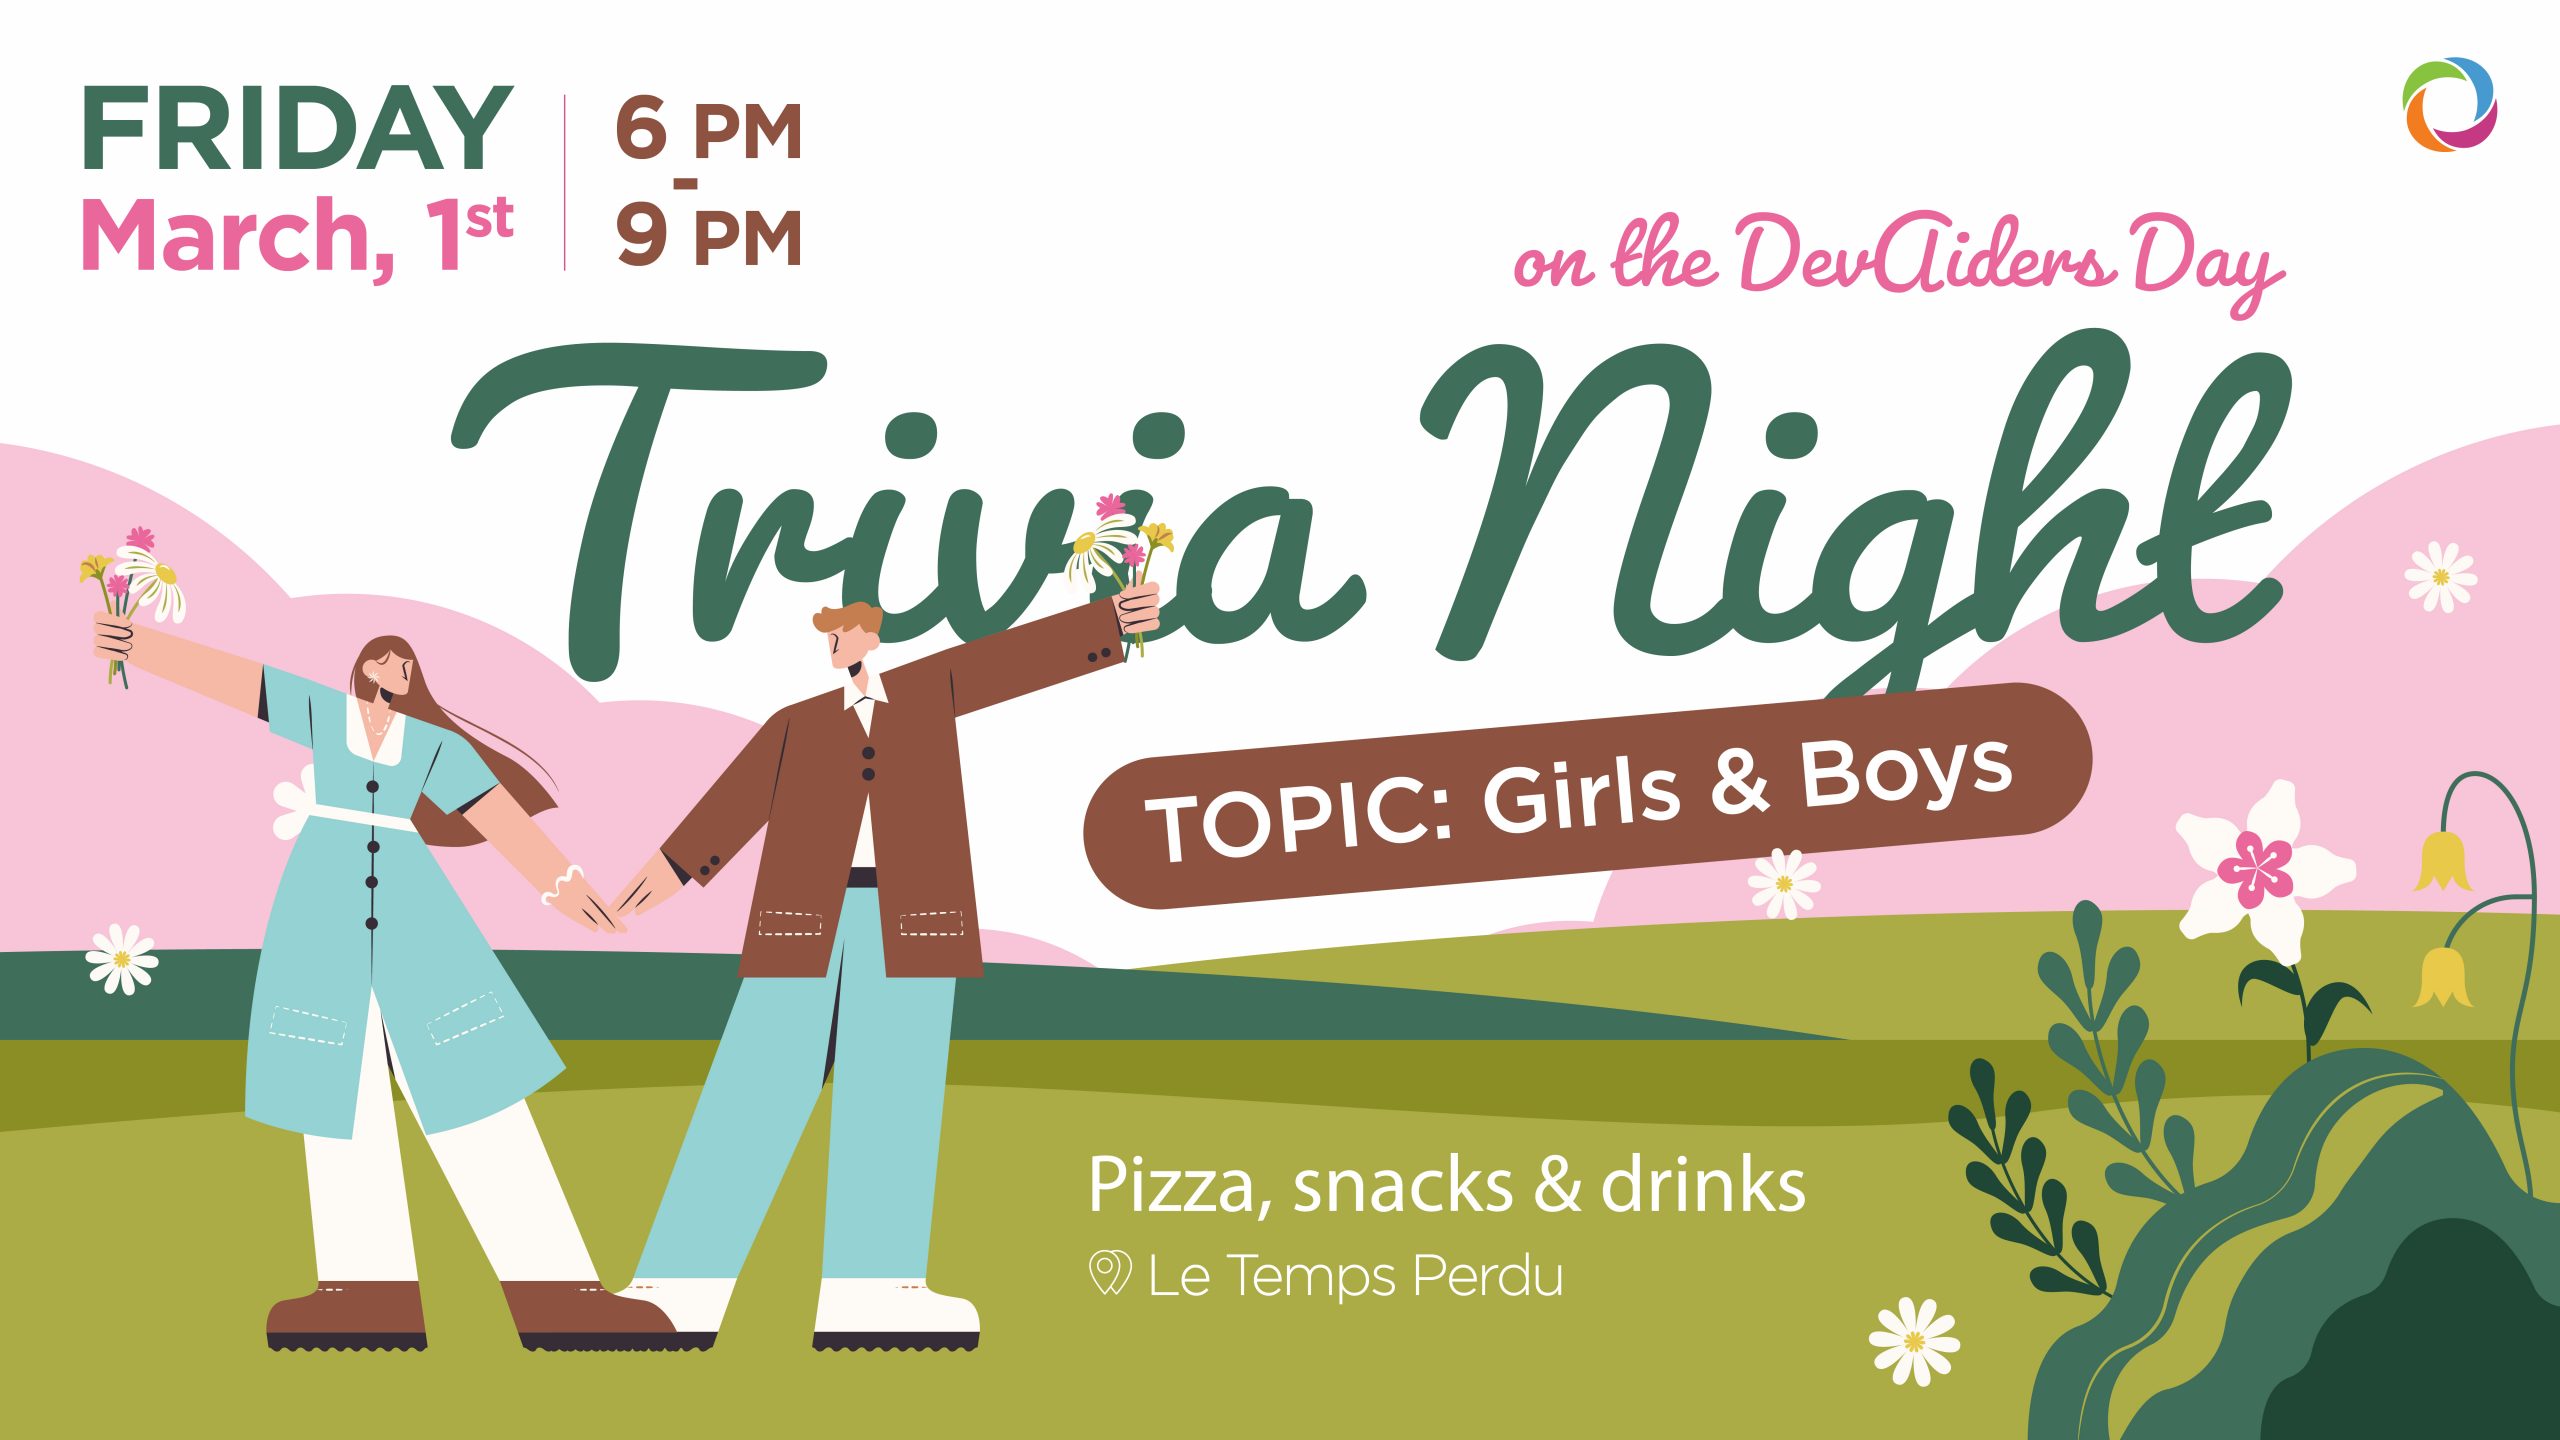 Trivia Night on the DevAiders Day